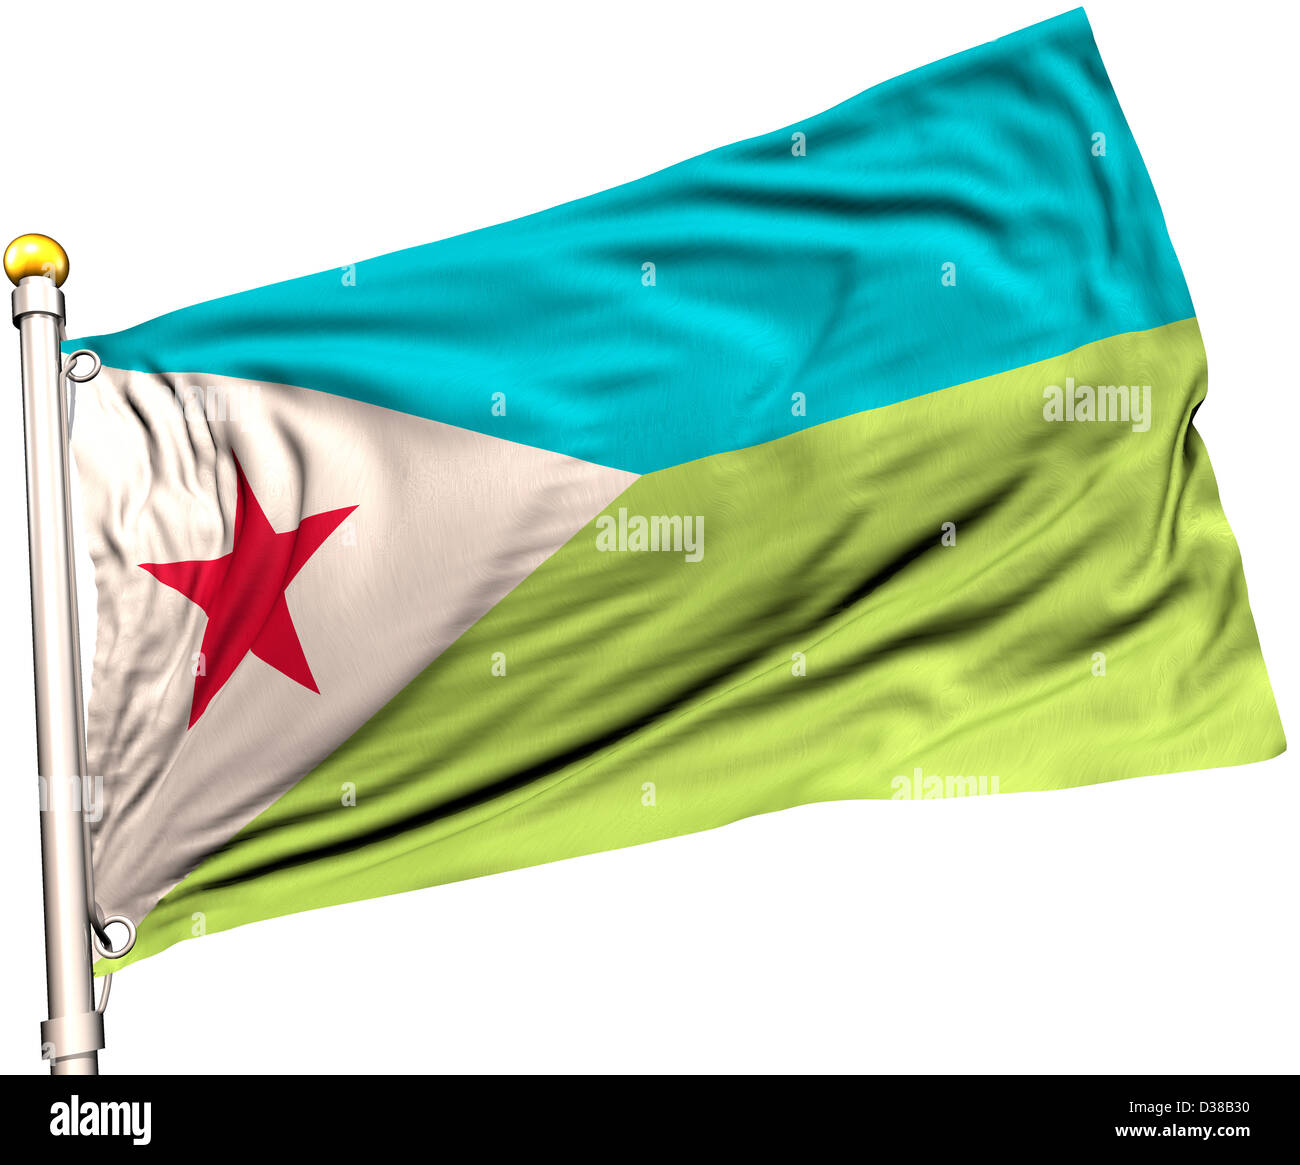 Djibouti flag on a flag pole. Clipping path included. Silk texture visible on the flag at 100%. Stock Photo